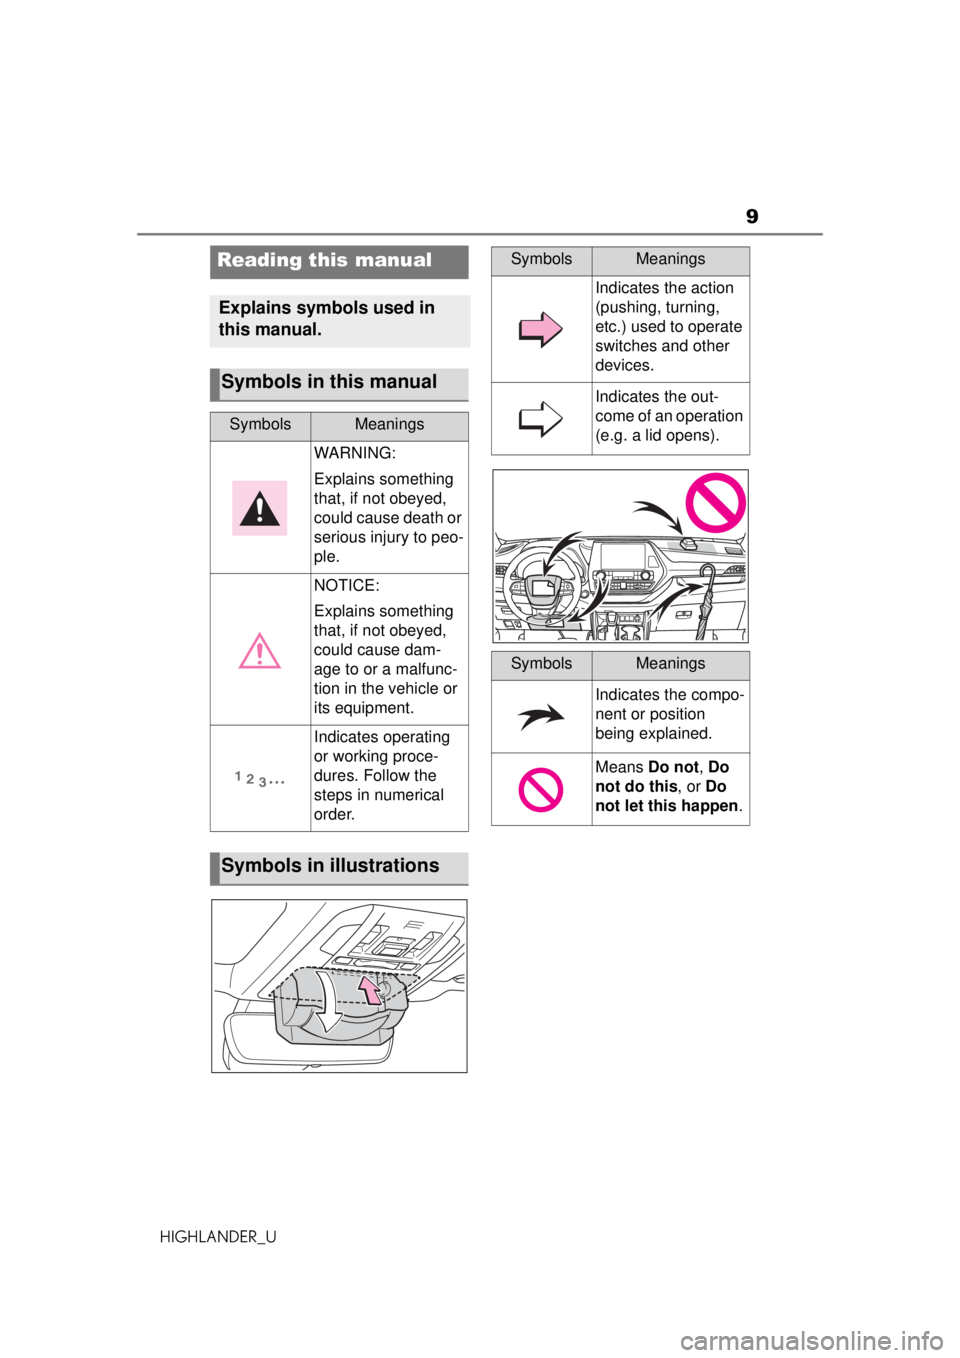 TOYOTA HIGHLANDER 2020  Owners Manual (in English) 9
HIGHLANDER_U
Reading this manual
Explains symbols used in 
this manual.
Symbols in this manual
SymbolsMeanings
WARNING:
Explains something 
that, if not obeyed, 
could cause death or 
serious injury